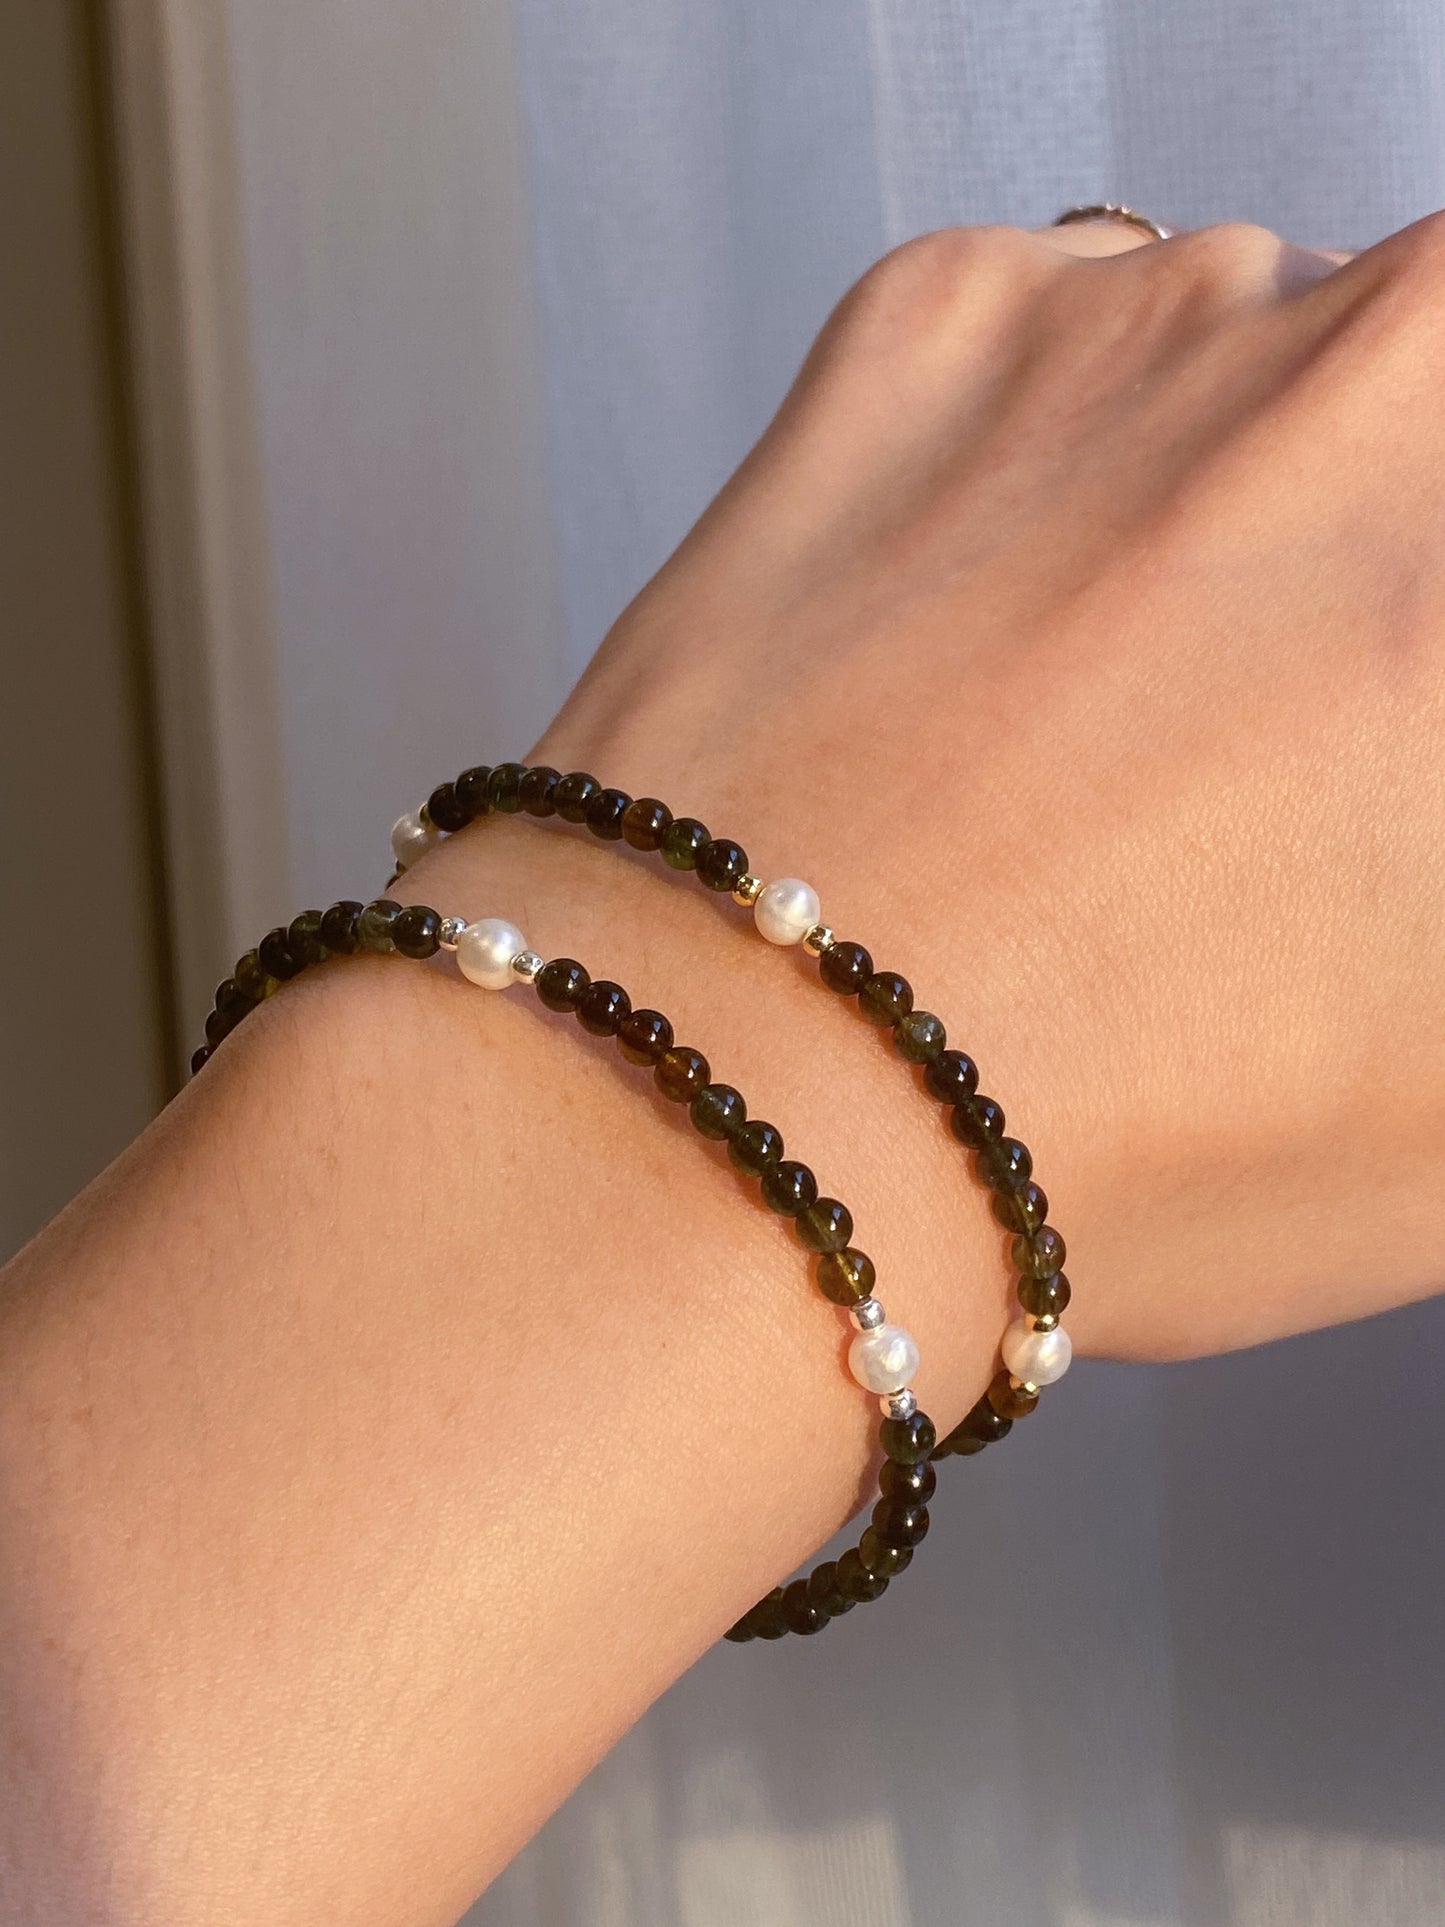 Care Band Black Beauty Tourmaline with Small Pearl Round Bracelet